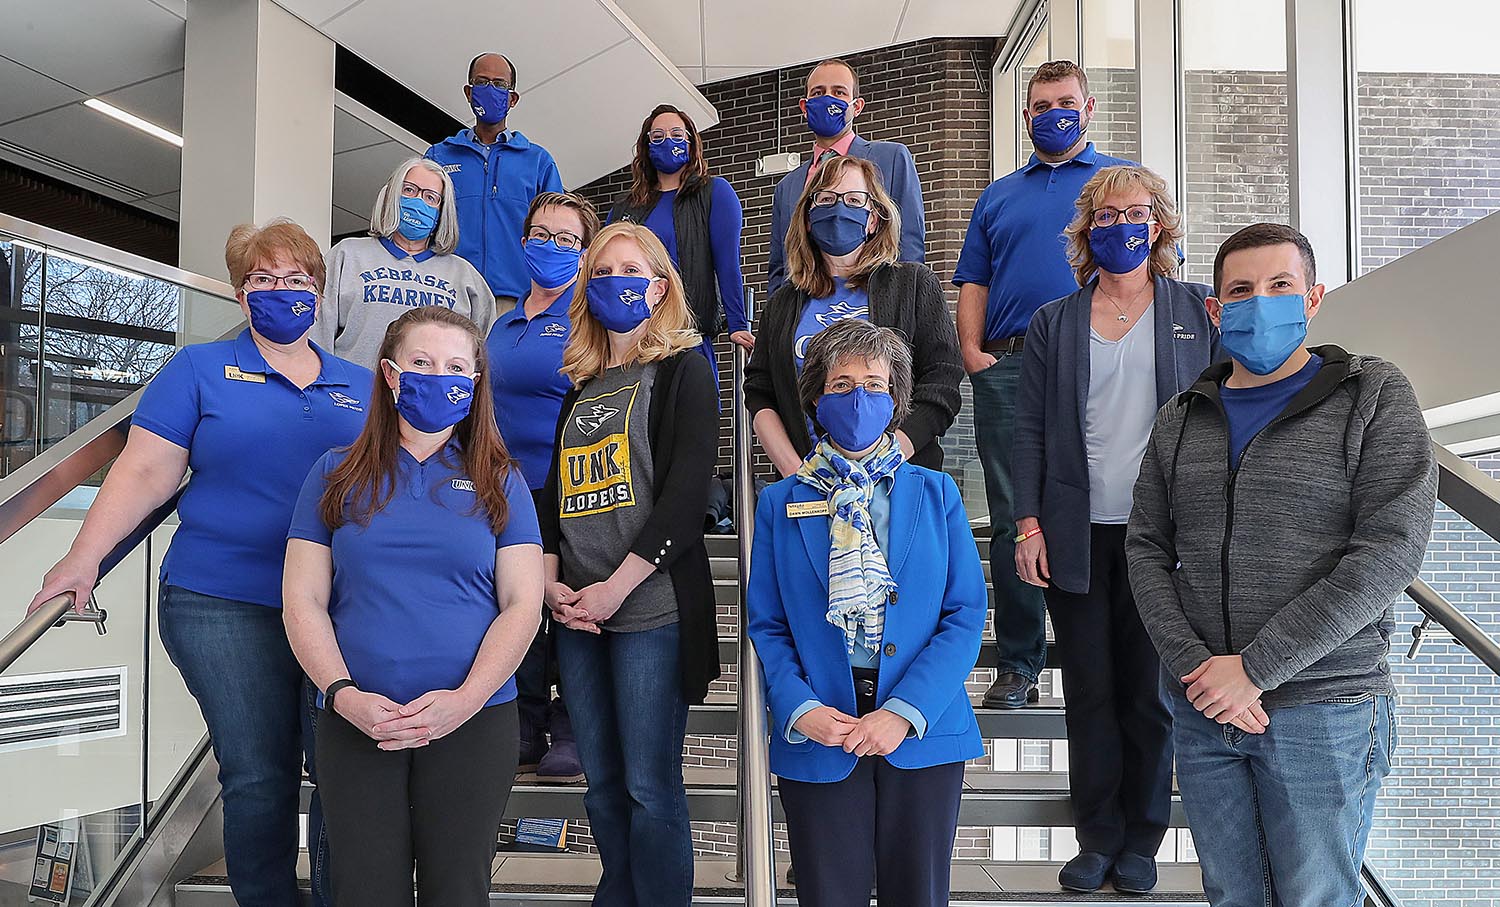 The Equity, Access and Diversity Advisory includes faculty, staff and students representing each academic college and non-academic division at UNK.